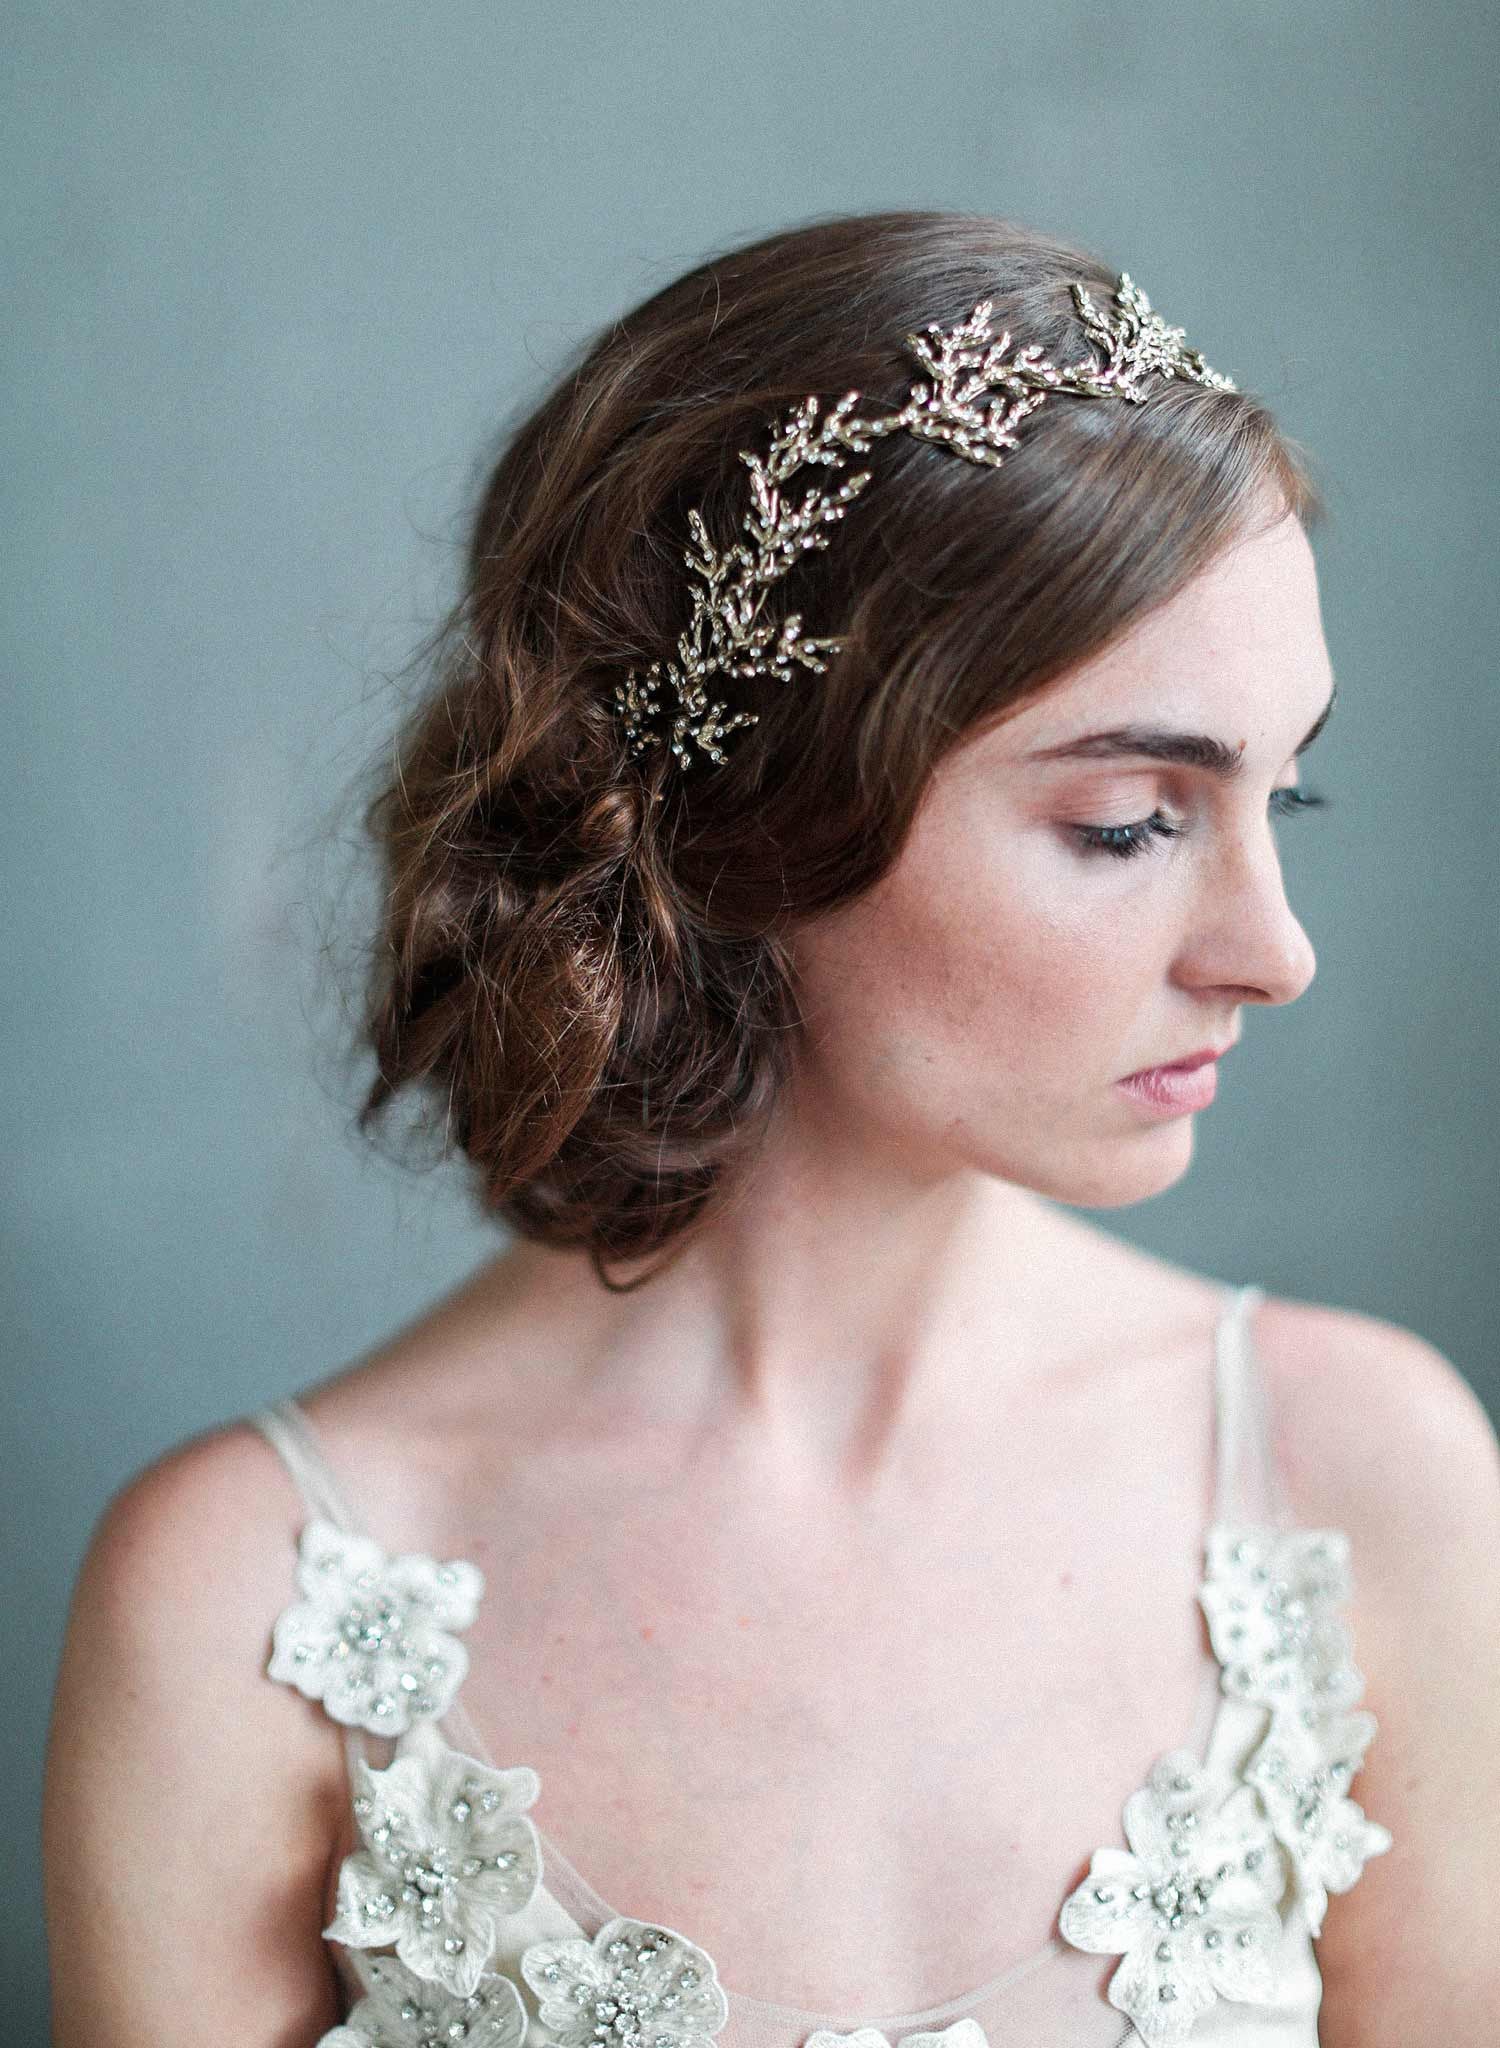 Gilded crystal encrusted branch headpiece - Style #707